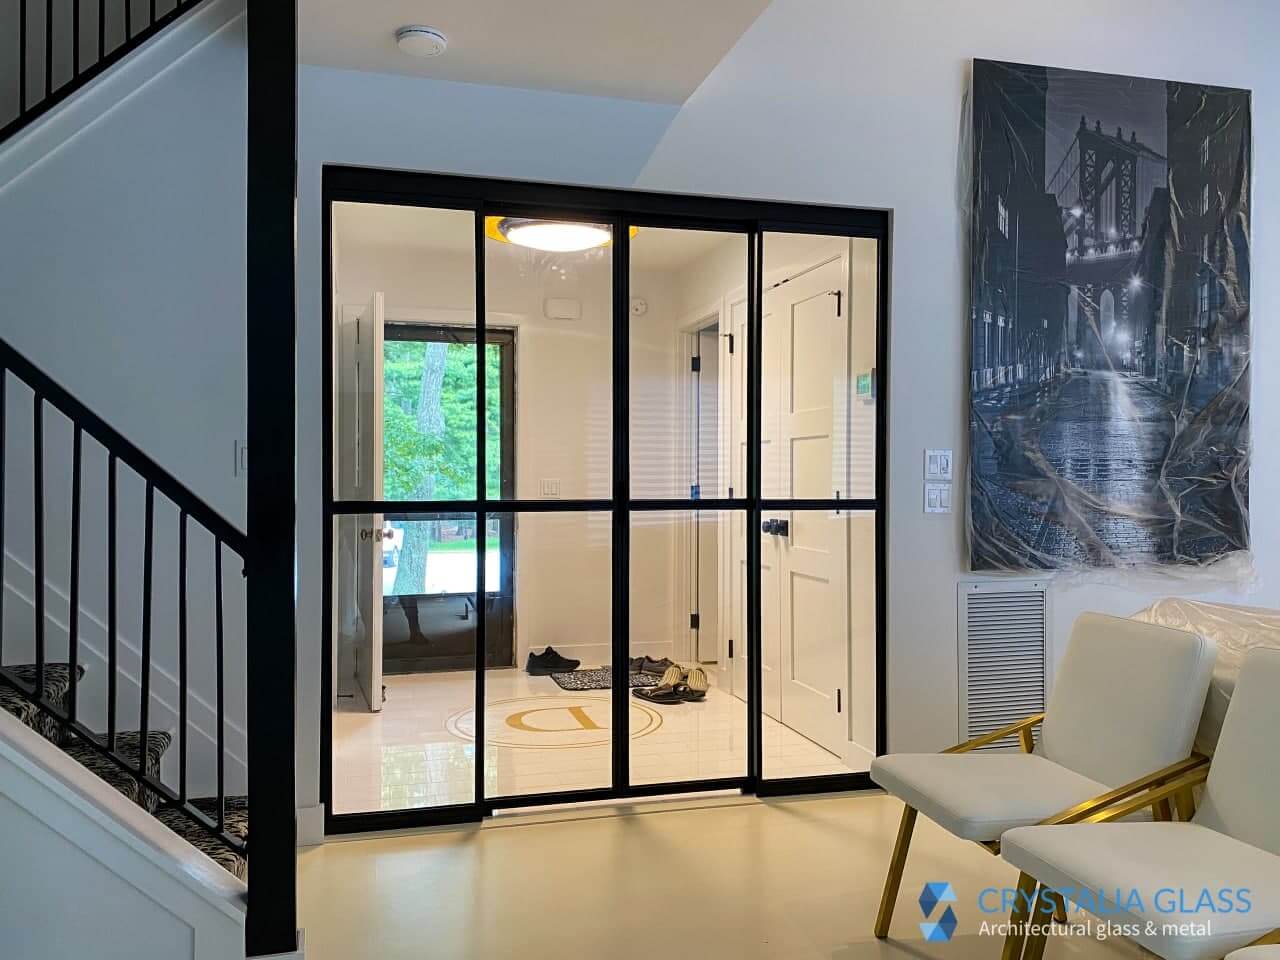 Check out our completed sliding glass doors projects!